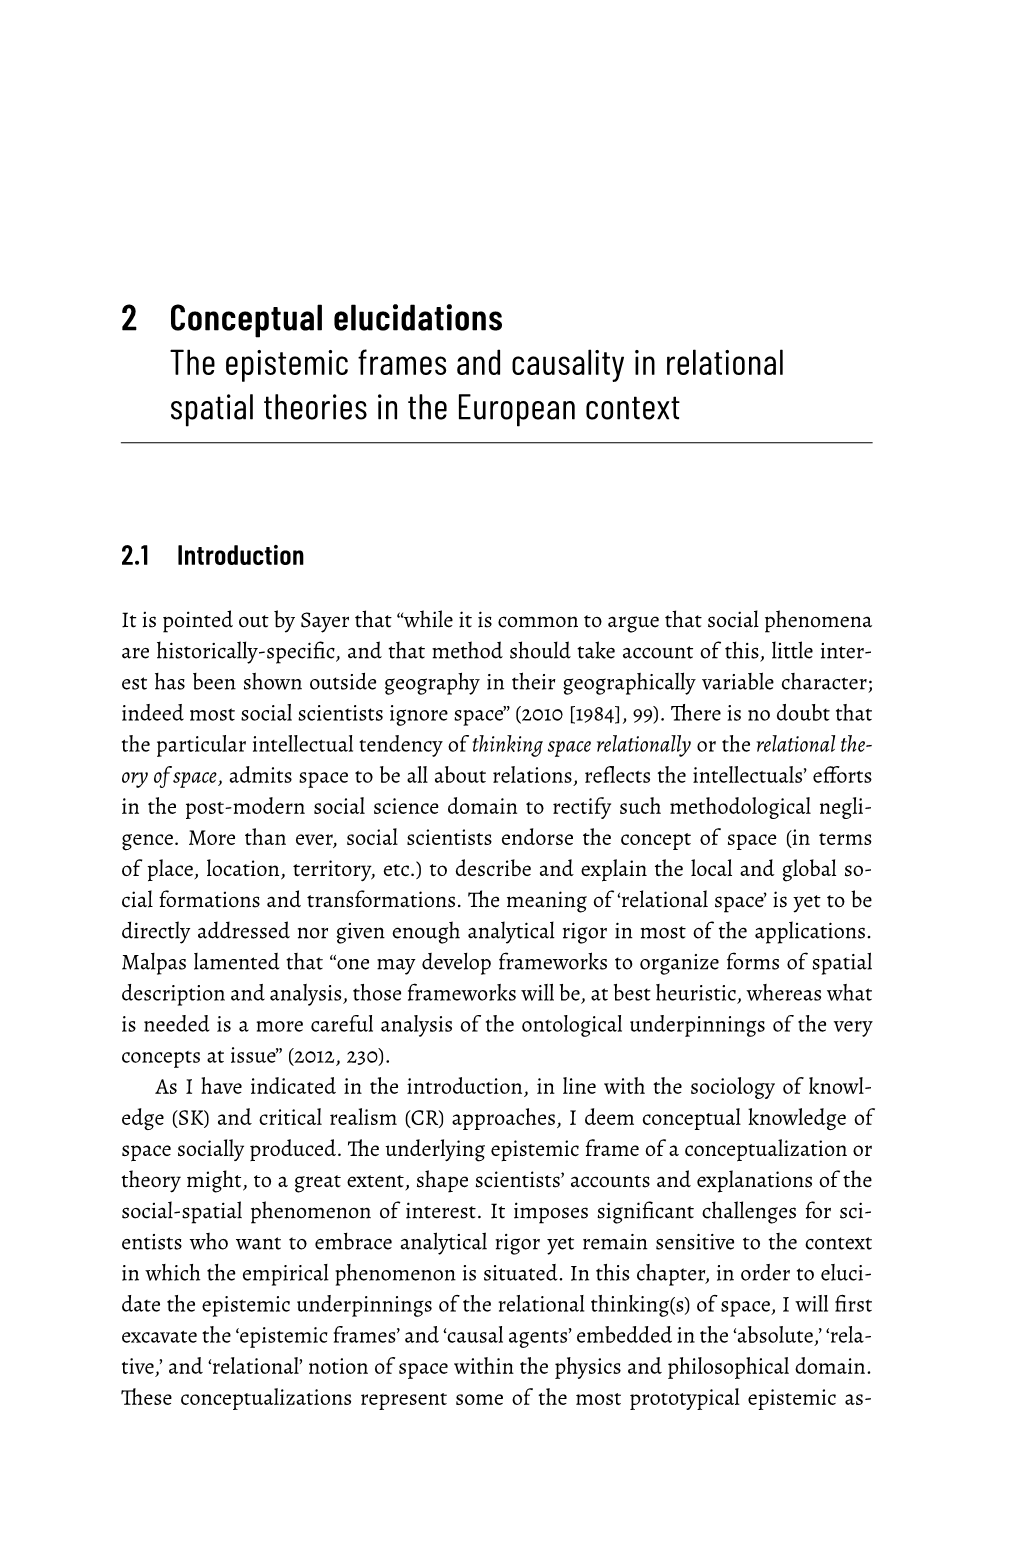 2 Conceptual Elucidations the Epistemic Frames and Causality in Relational Spatial Theories in the European Context